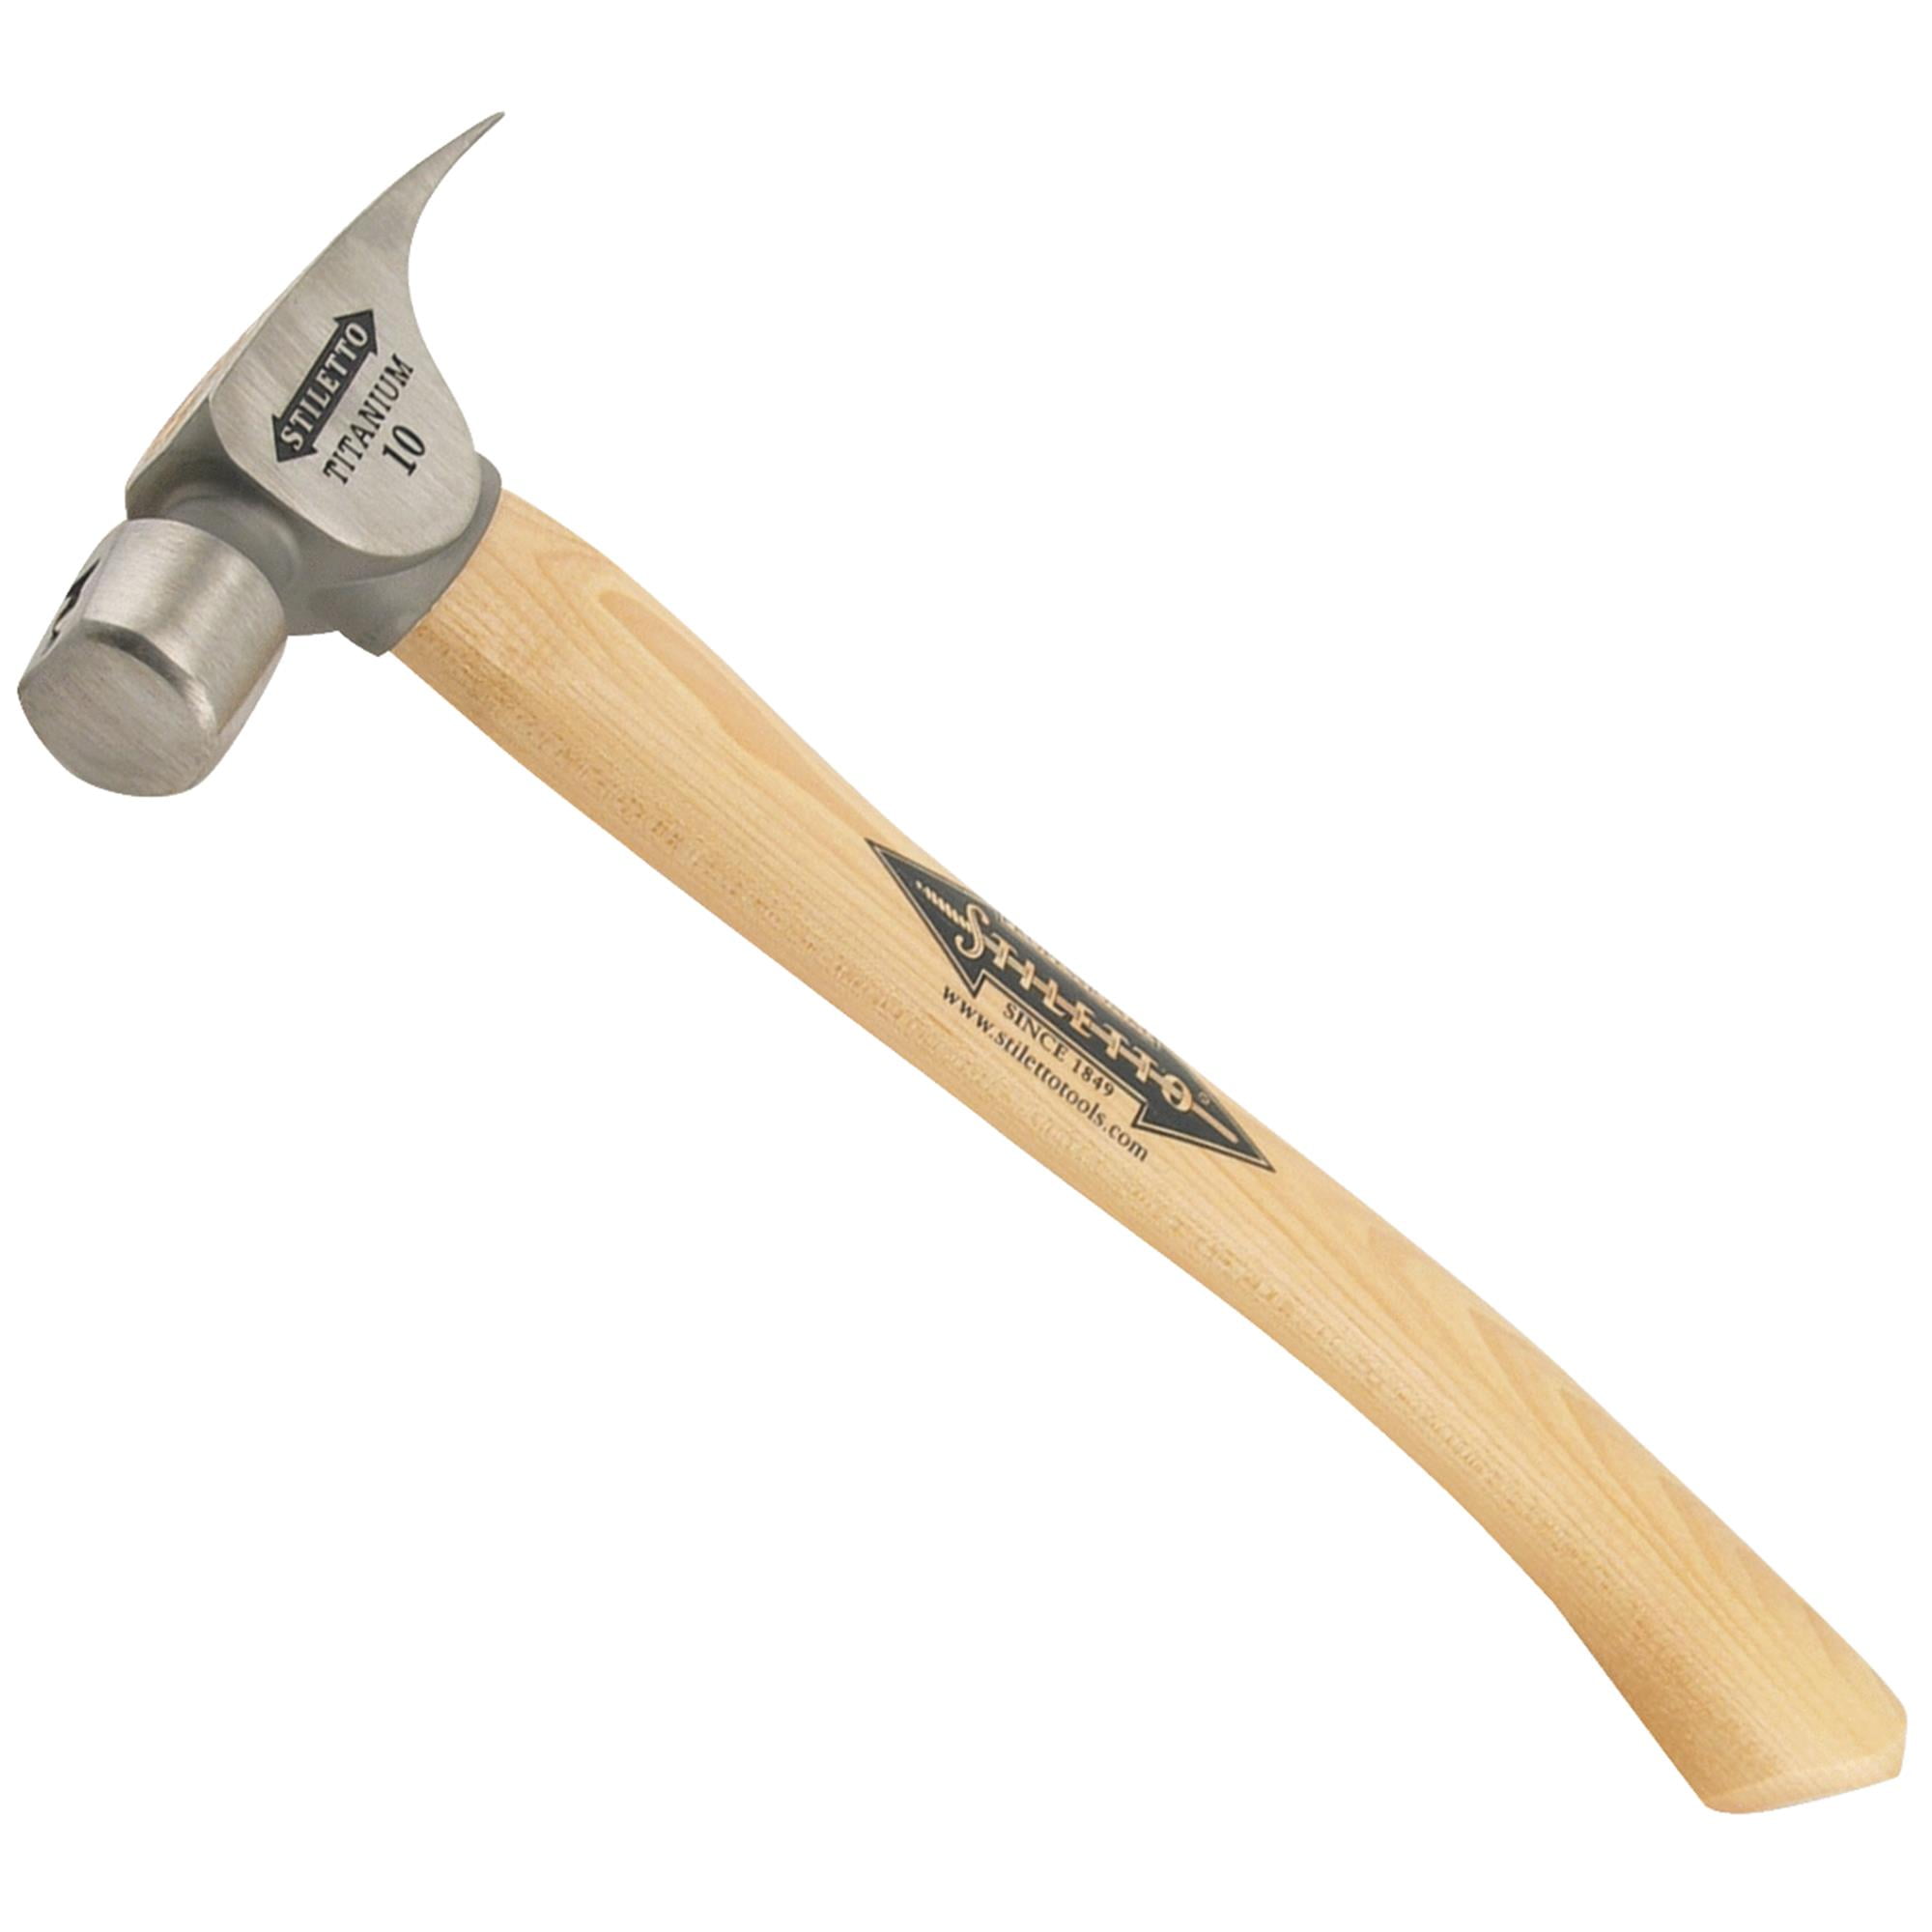 Titanium Hammer  HART Forged 11OZ  trimmer curved hickory handle 